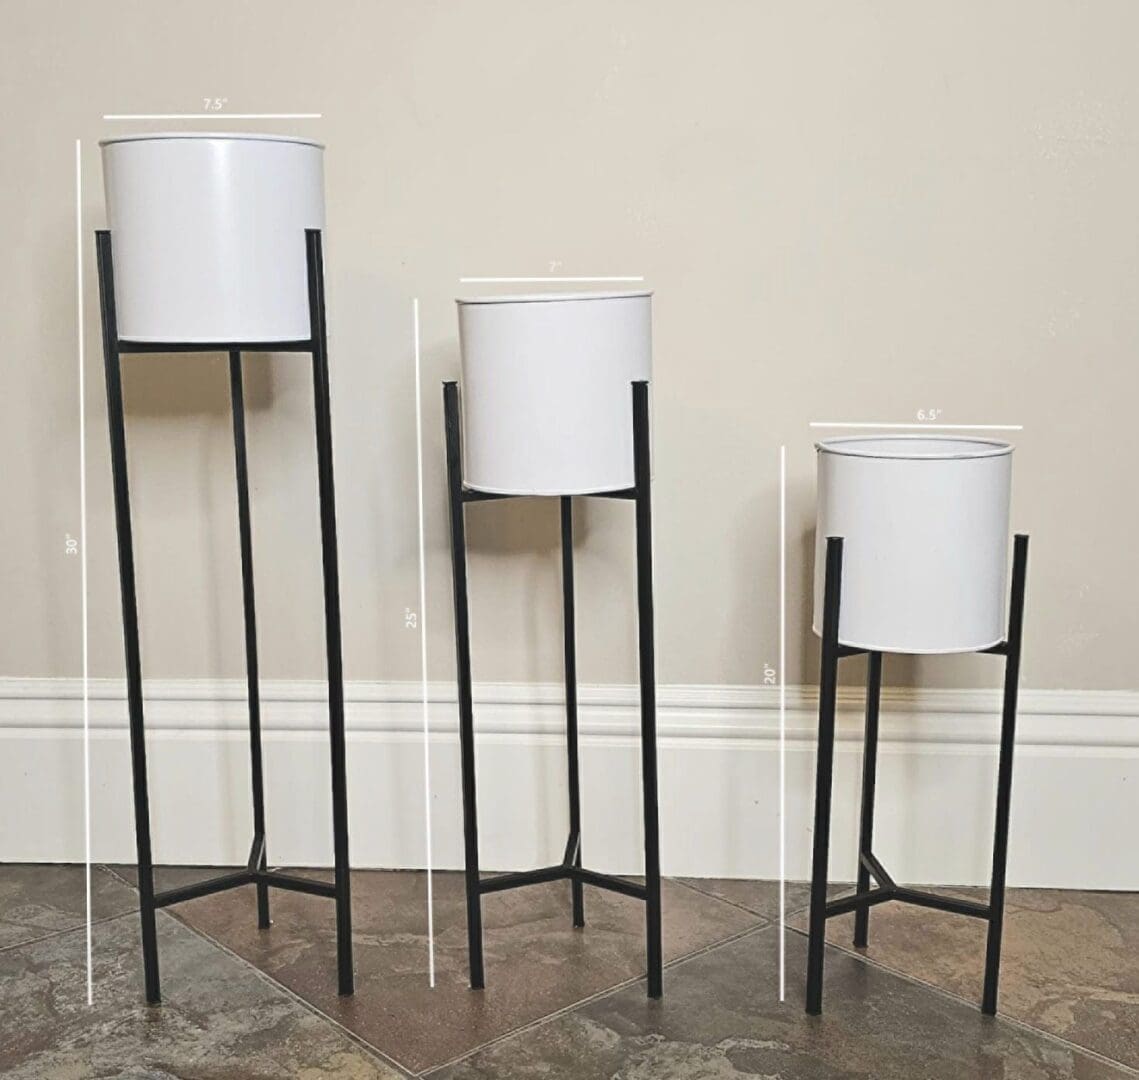 Three tall white pots with stands on a floor.